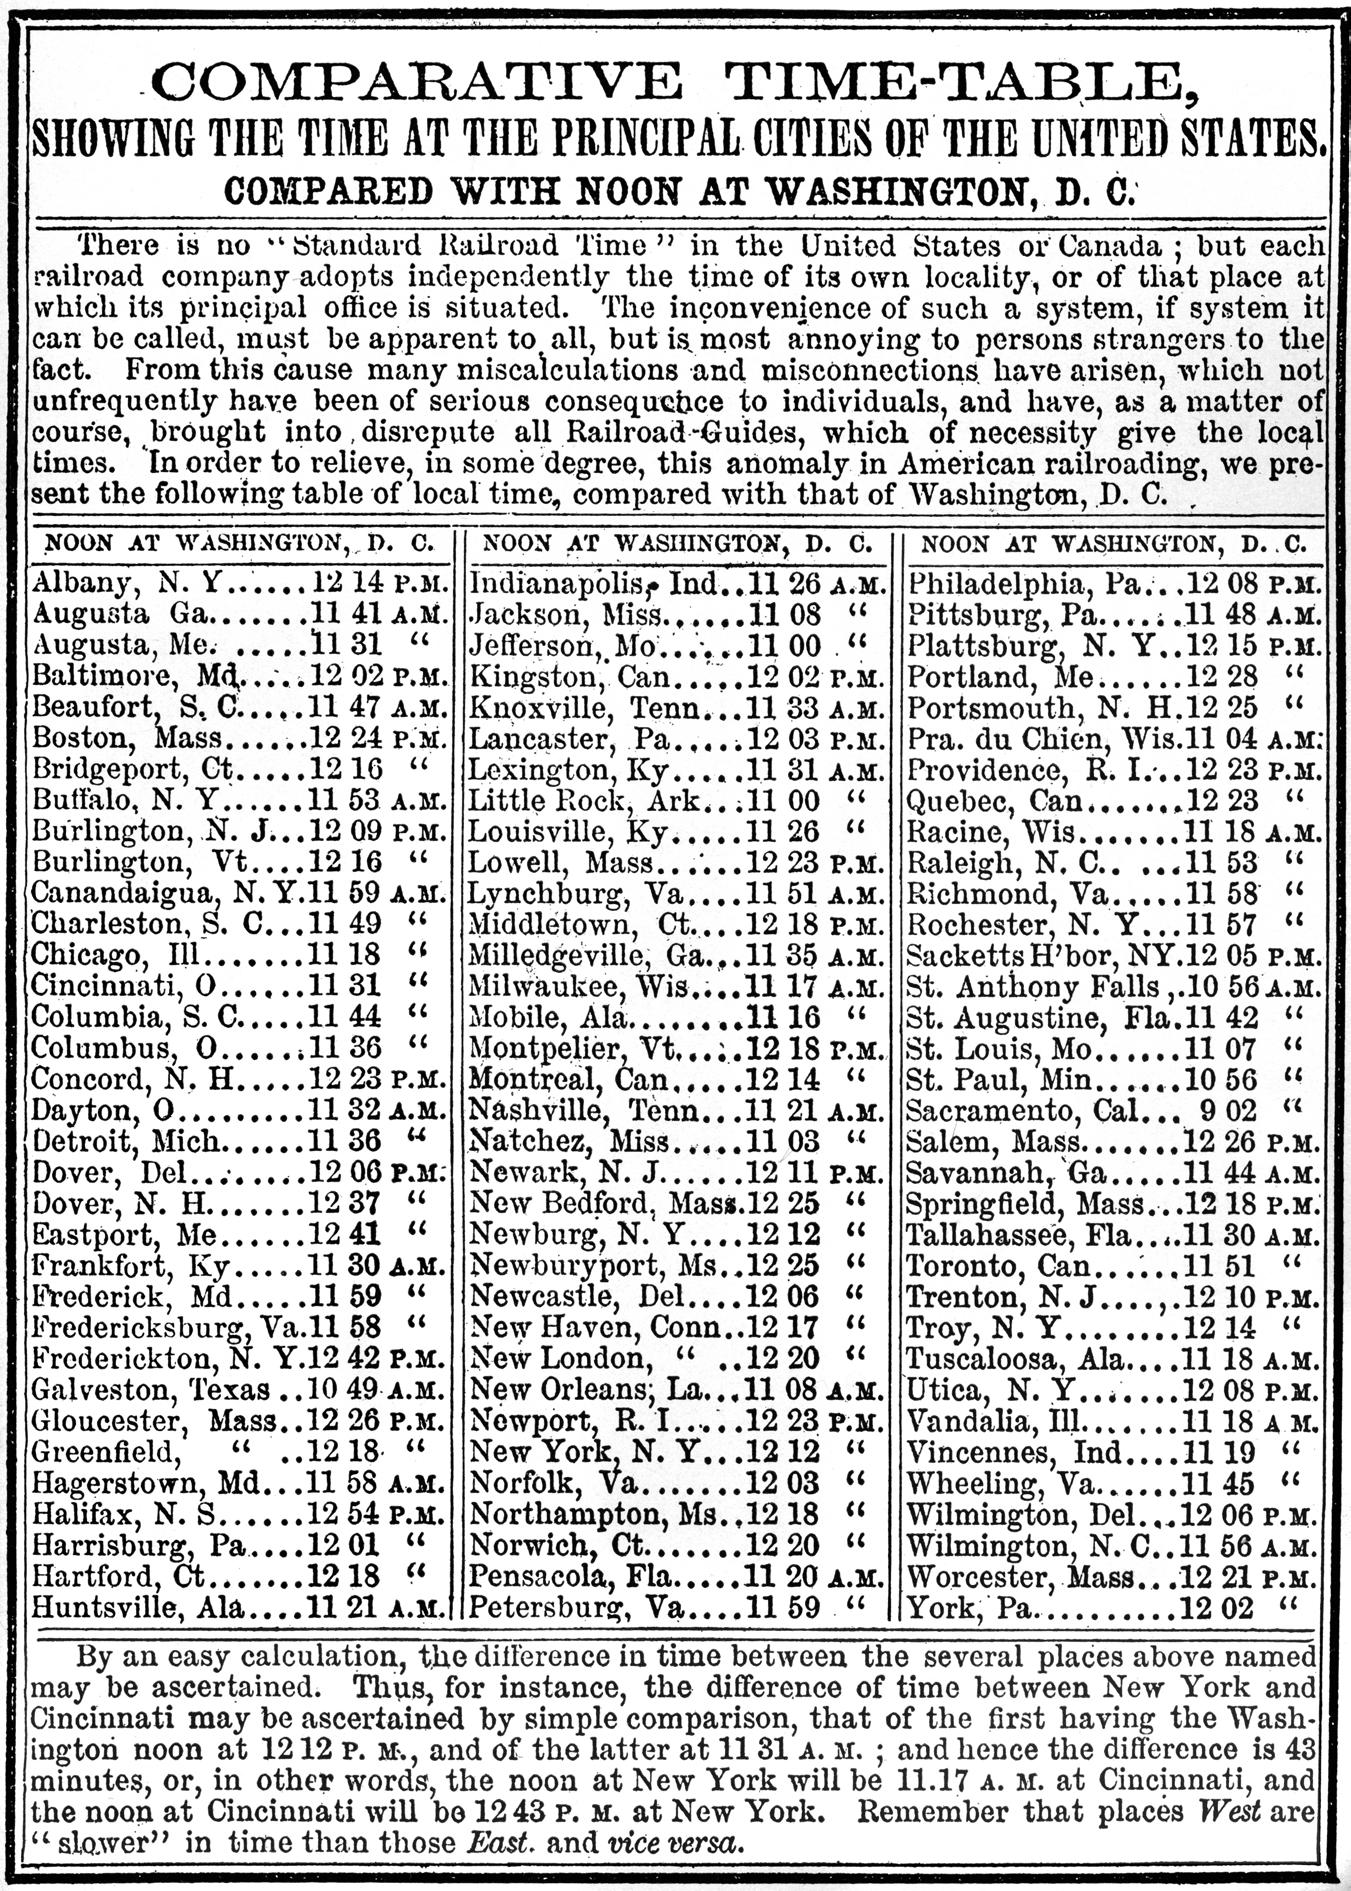 Comparative Time Table in 1857 (Source: Wikimedia Commons)